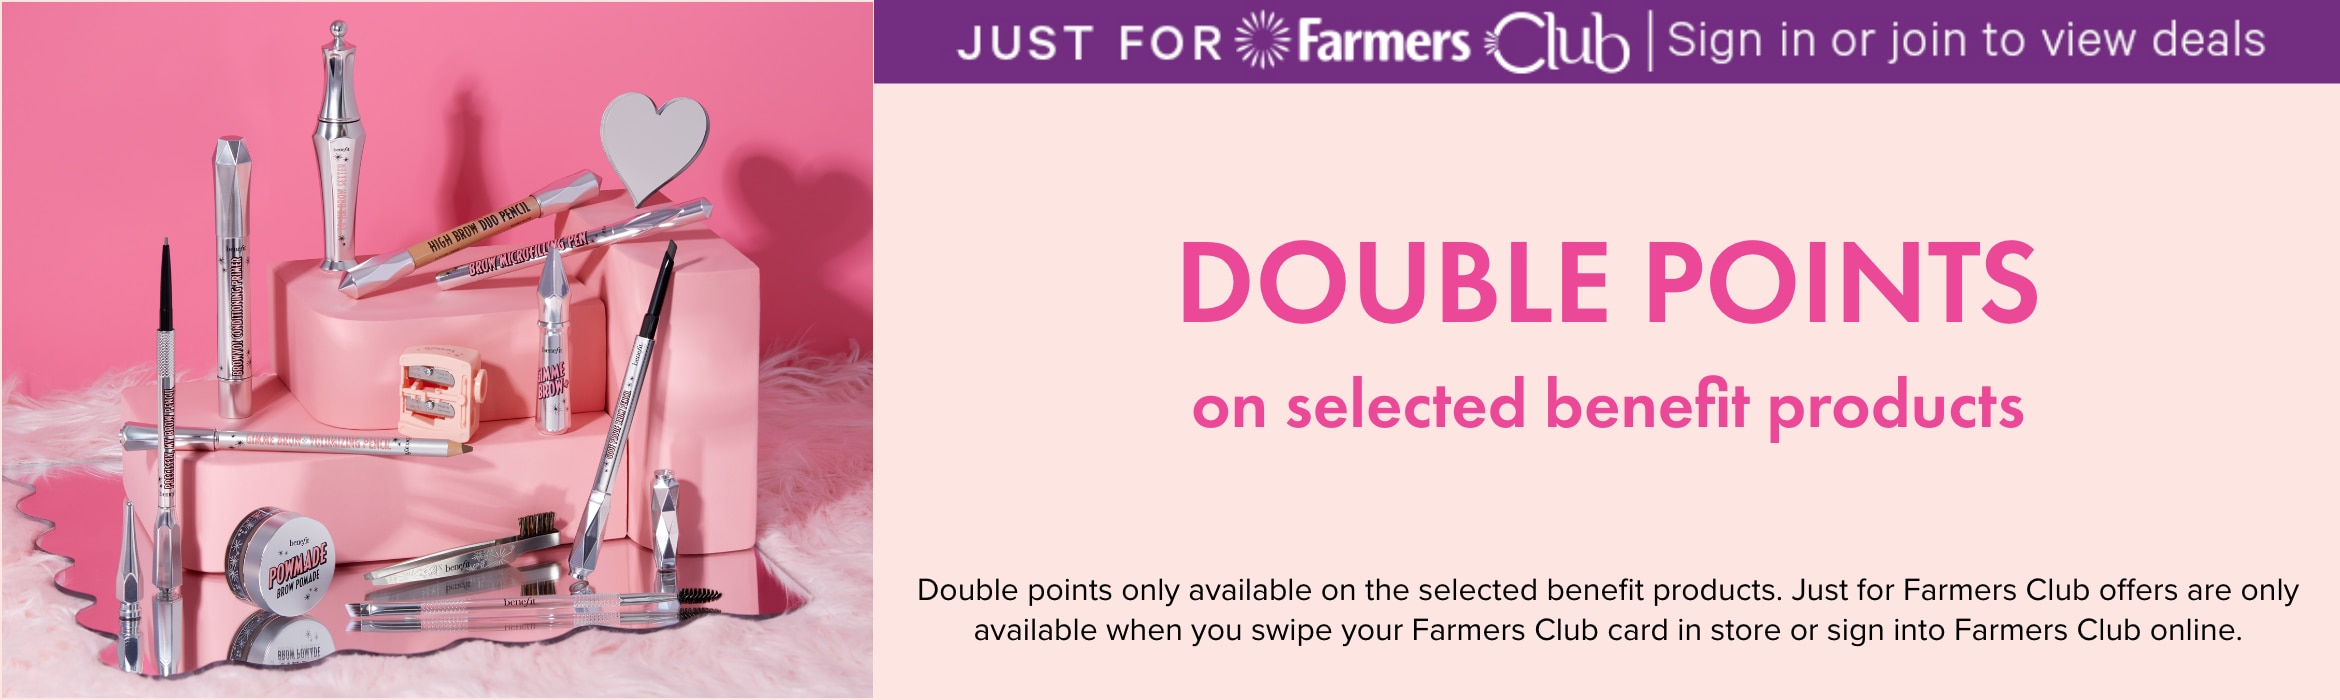 DOUBLE POINTS on selected benefit products